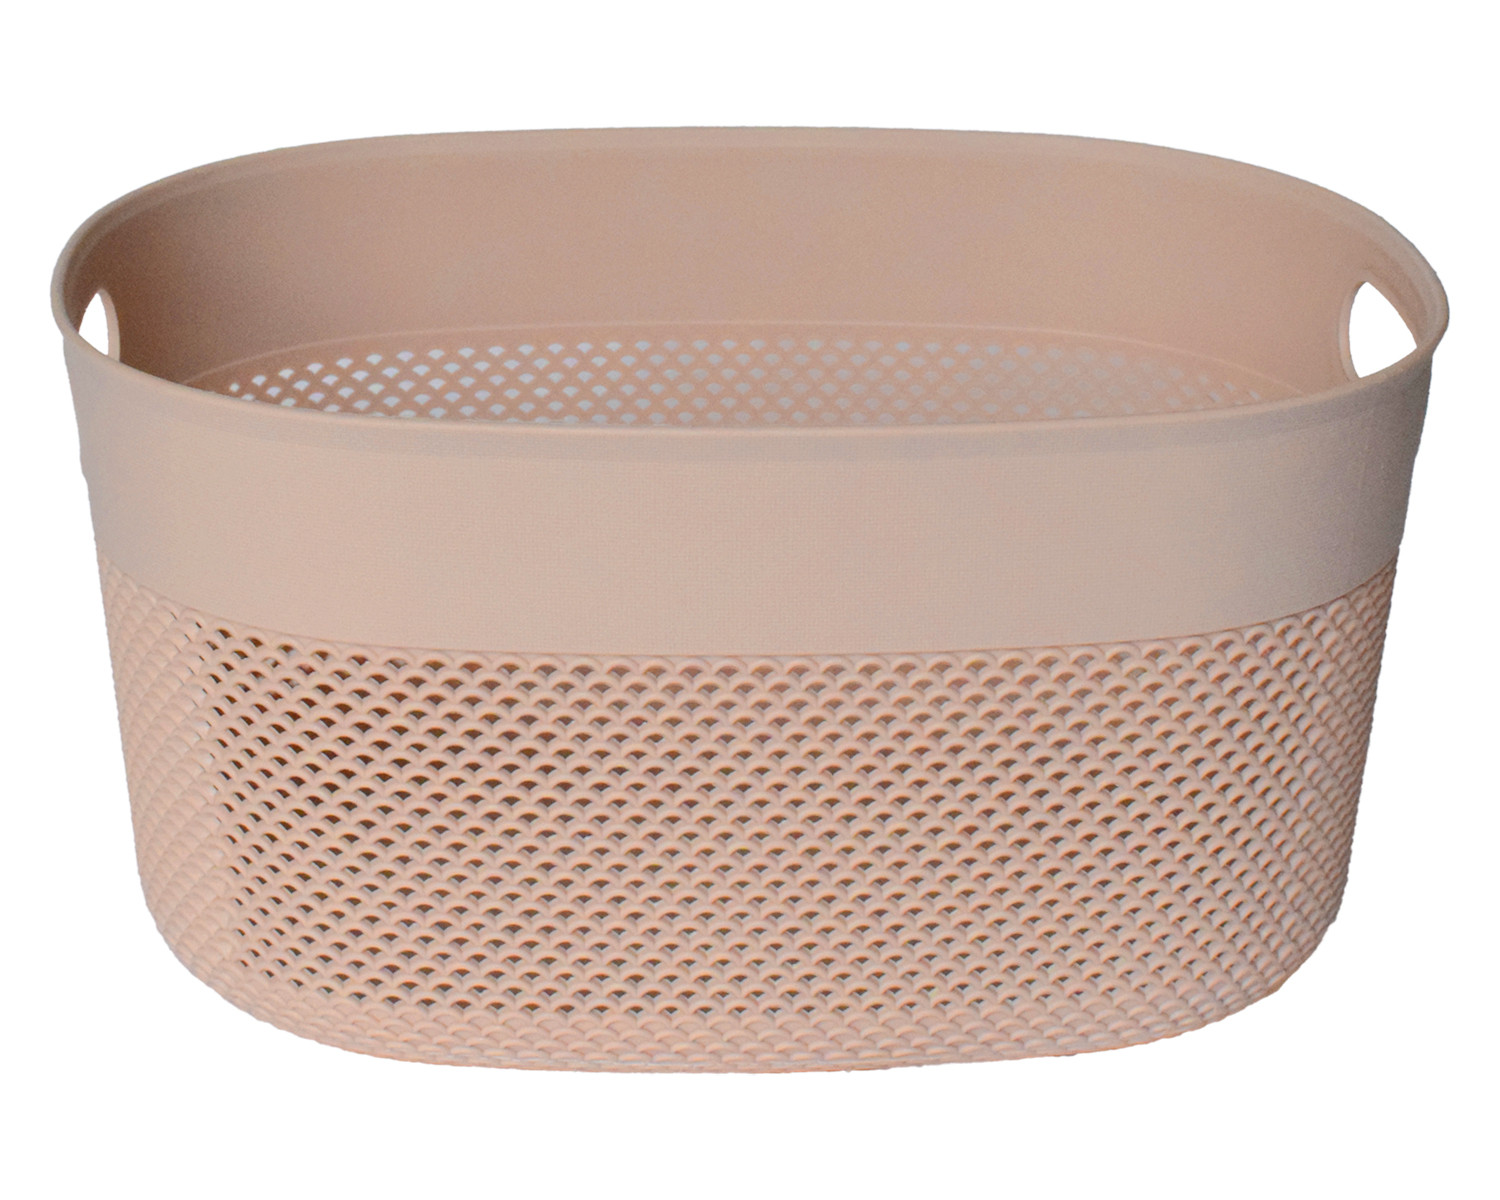 Kuber Industries Unbreakable Multipurpose Storage Baskets with lid|Design-Netted|Material-Plastic|Shape-Oval|Color-Beige|Small,Medium and Large|Pack of 3